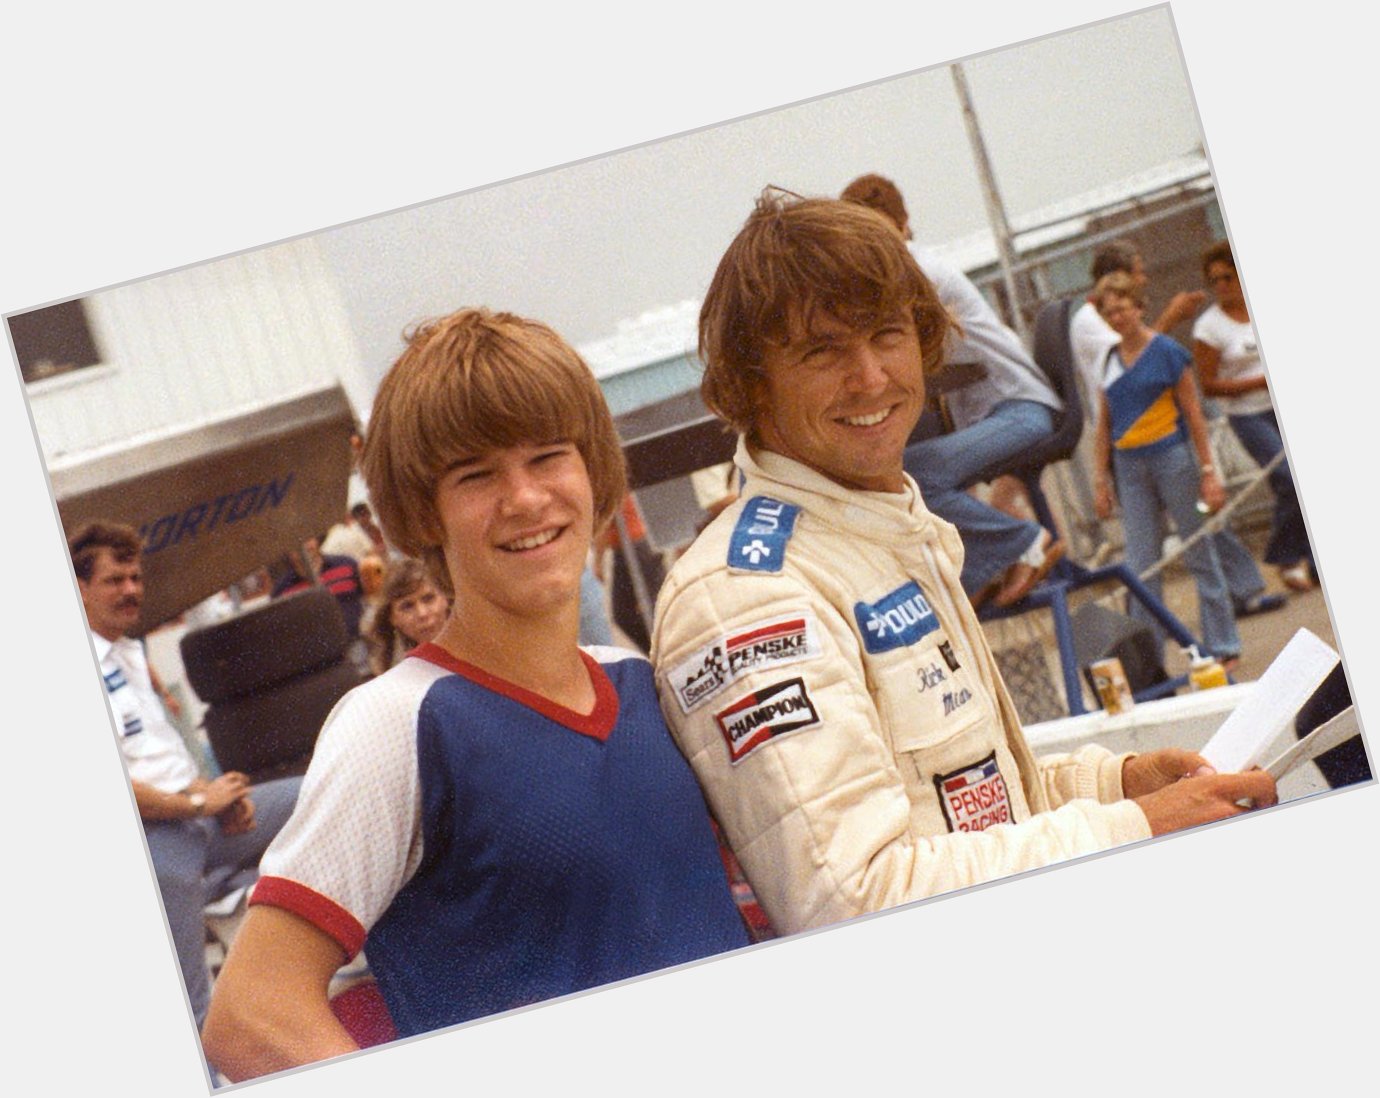 Happy Birthday Rick Mears!!!! (Four !!!! for 4 Indy 500 wins)  
Once, we were both younger. This was 79 